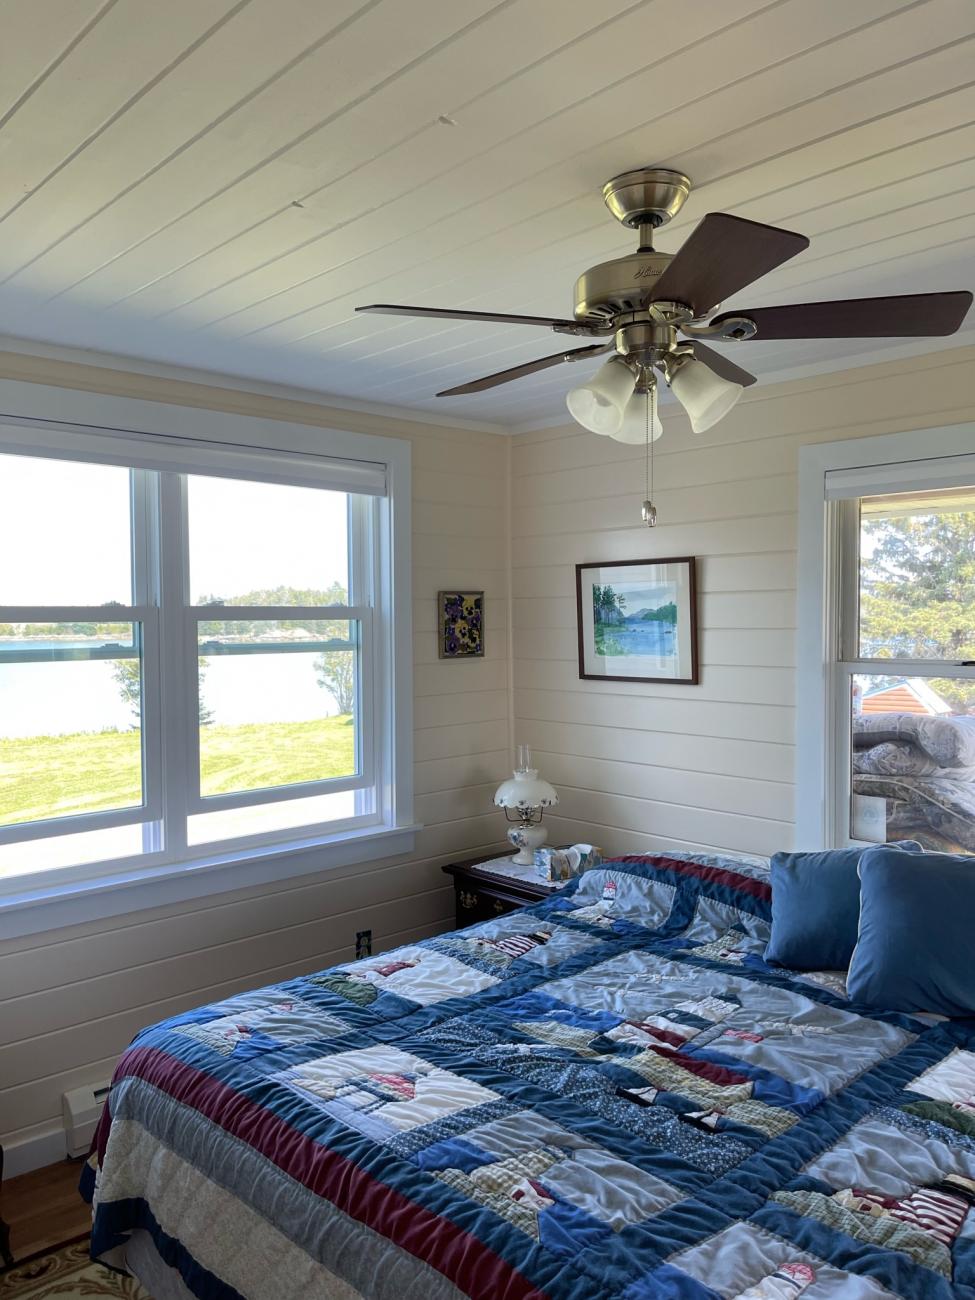 Bedroom with painted shiplap wood walls looking out onto the Maine coast.